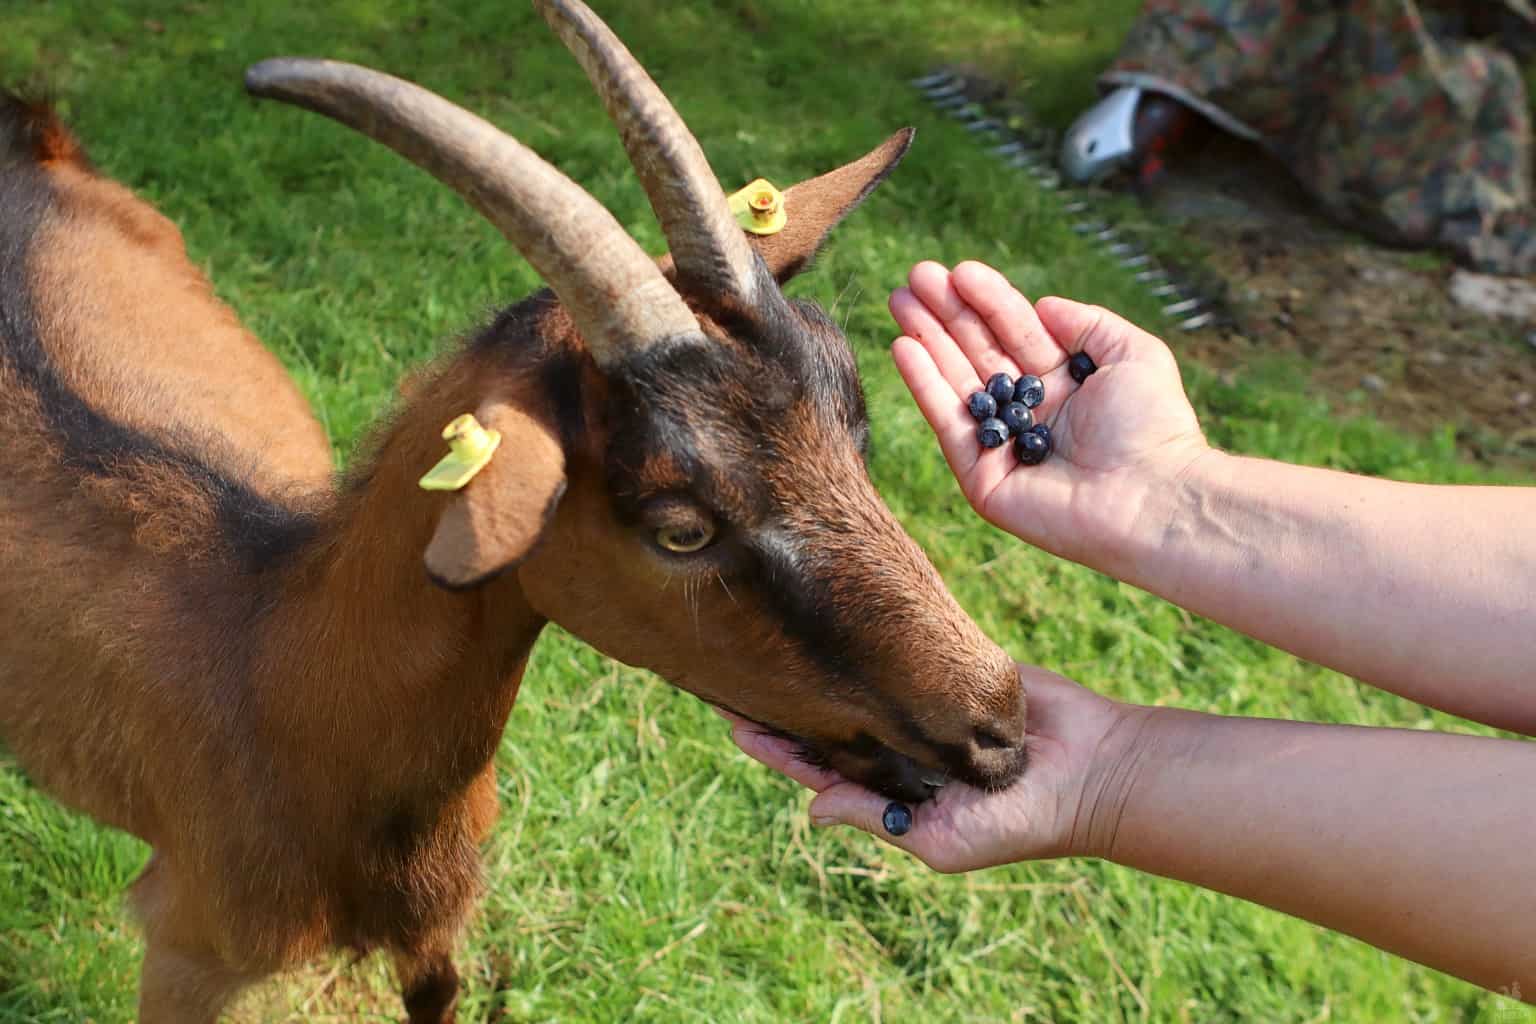 a goat eating some blueberries